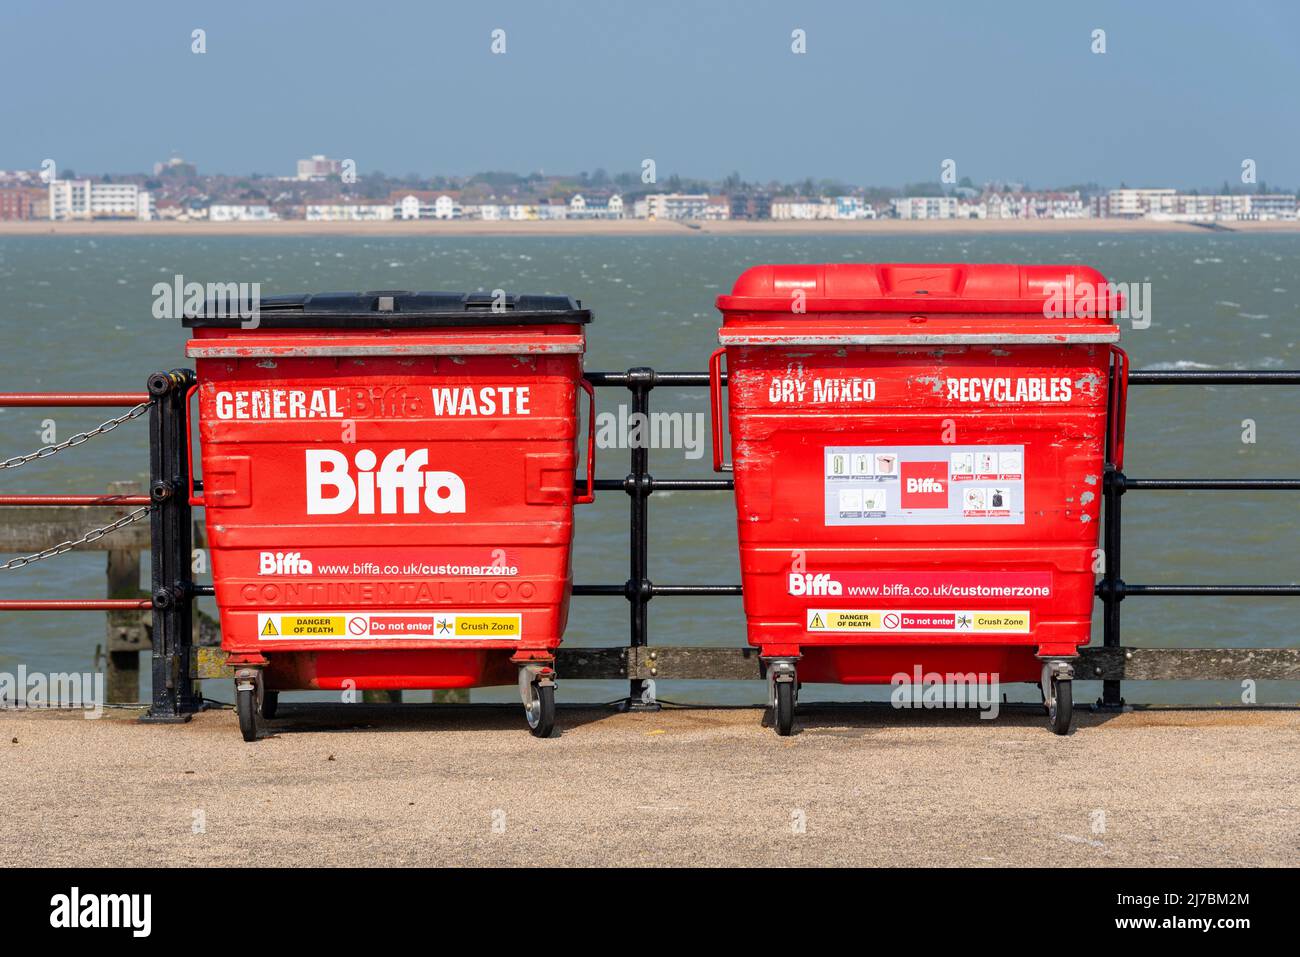 Two red waste bins on Southend Pier, Southend on Sea, Essex, UK. Out in the Thames Estuary. Distant waste collection. General waste and recyclables Stock Photo